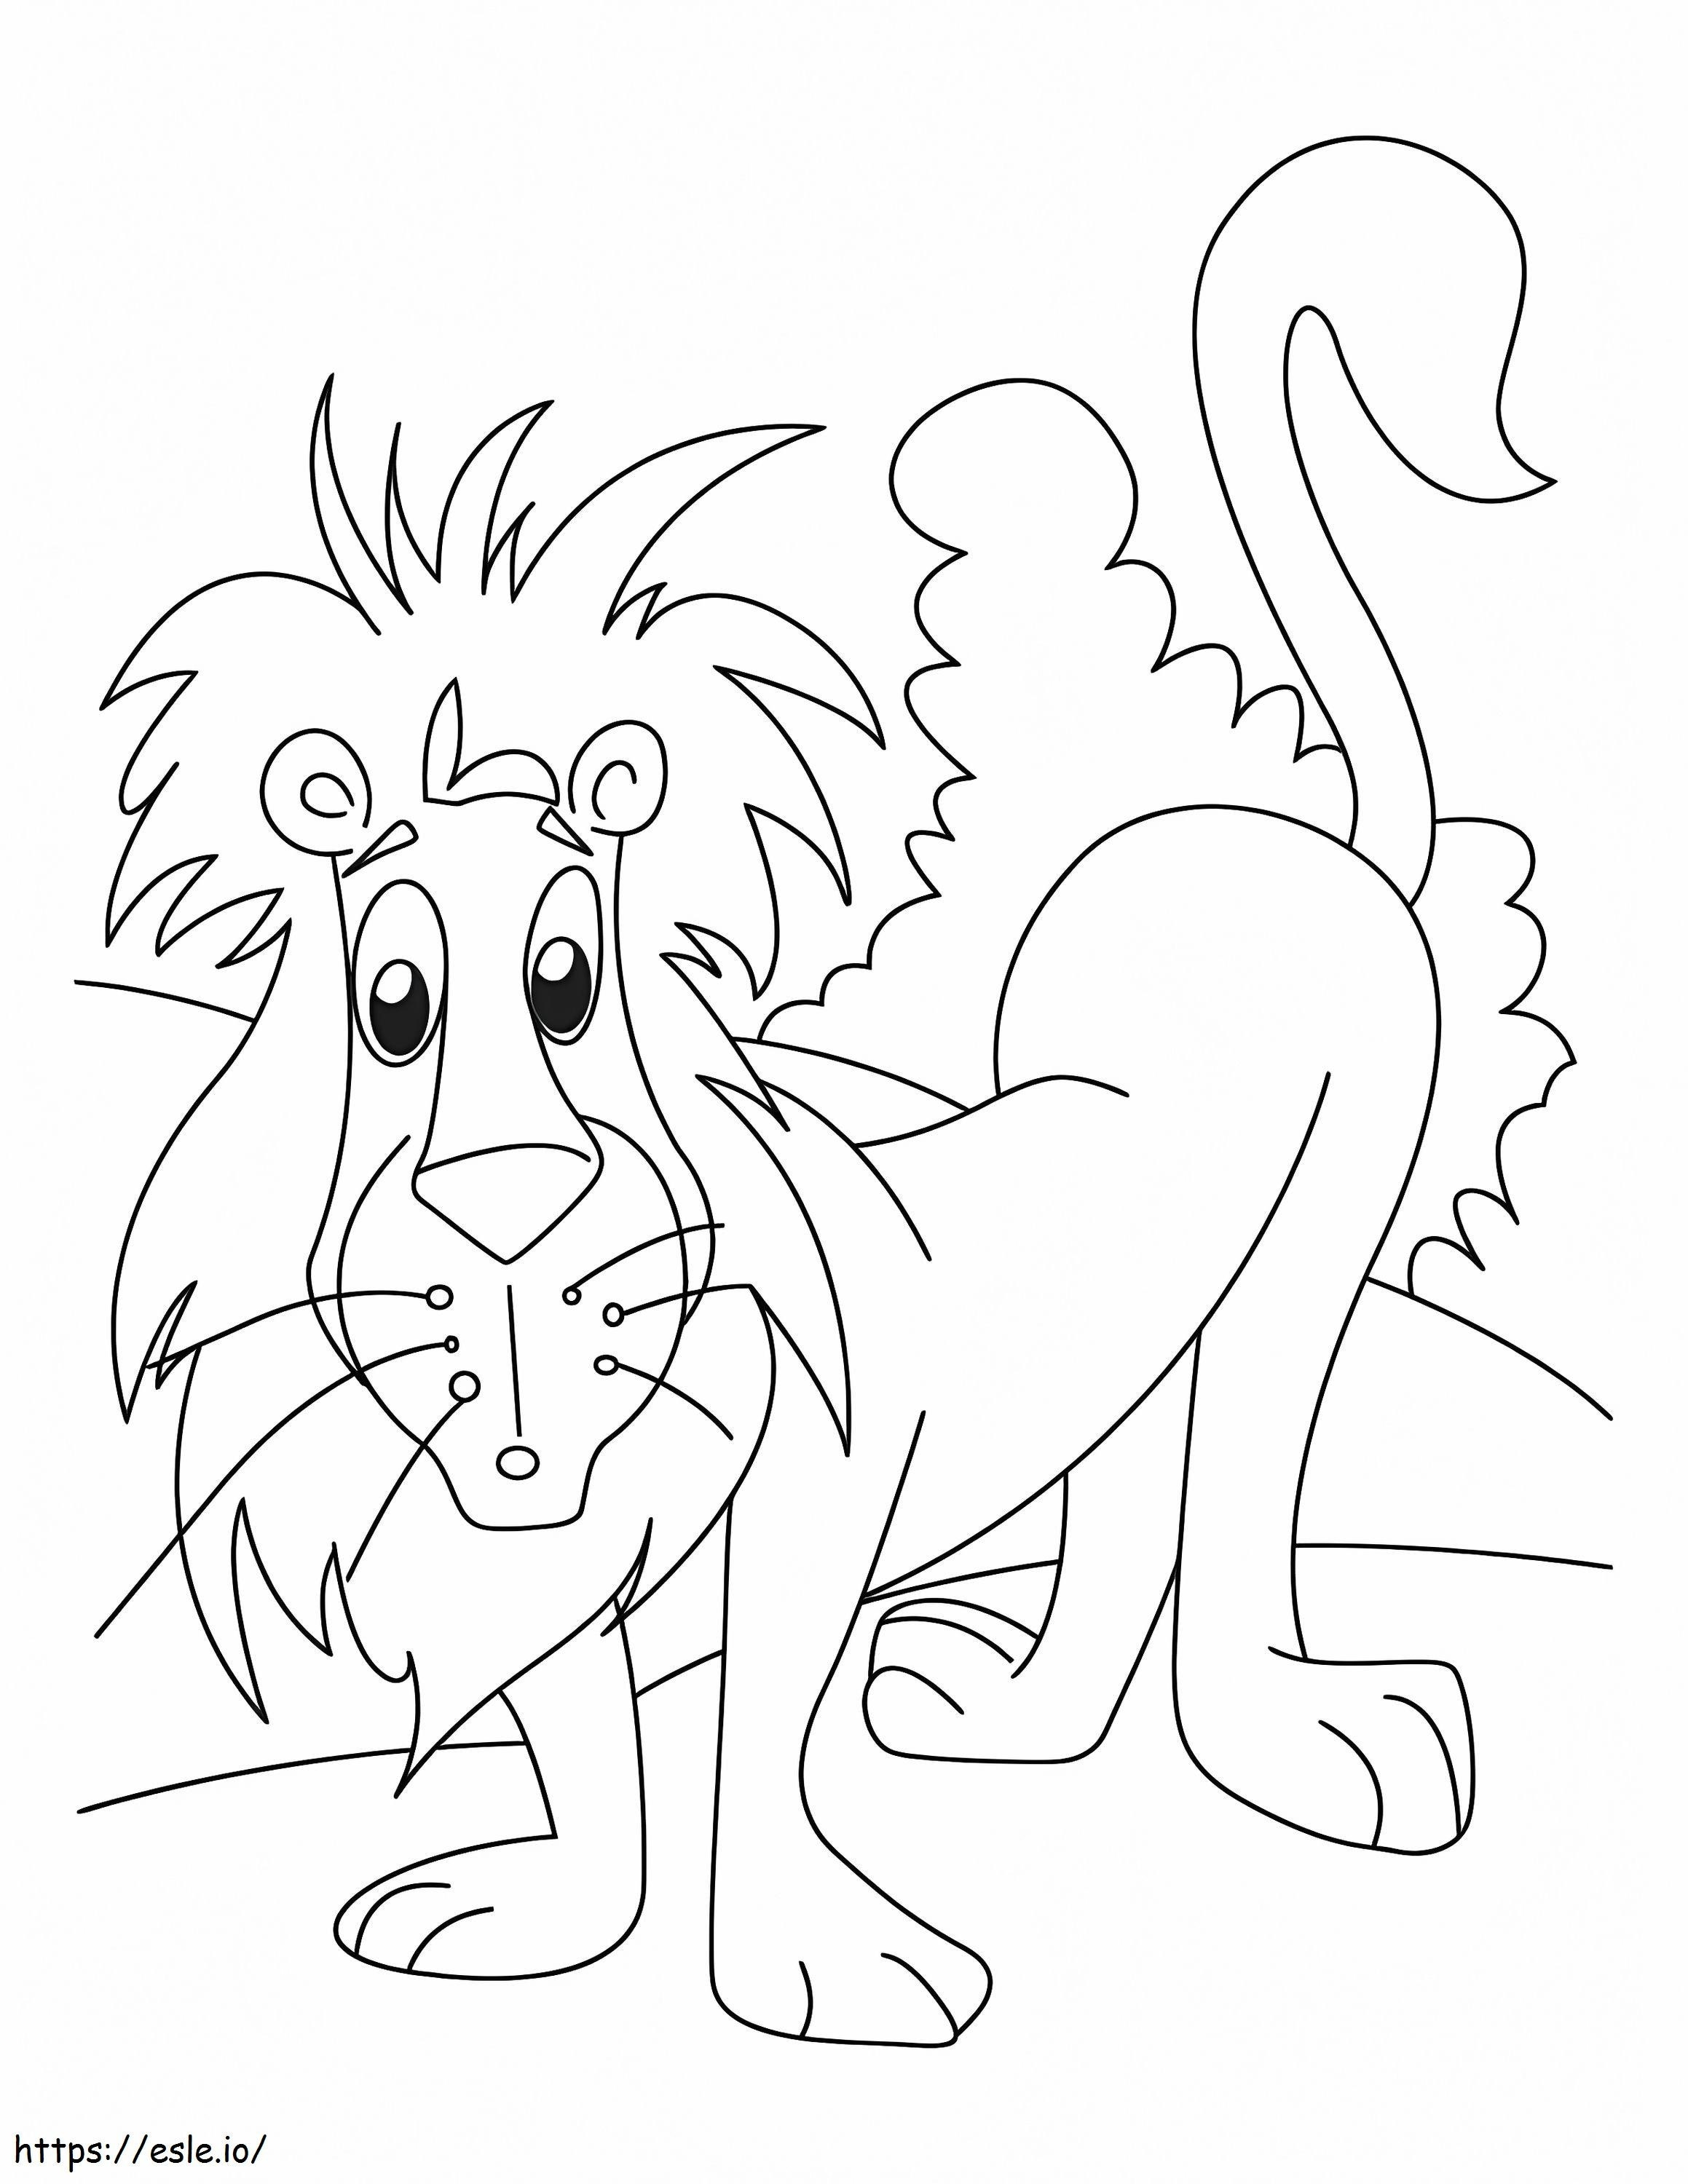 Confused Lion coloring page